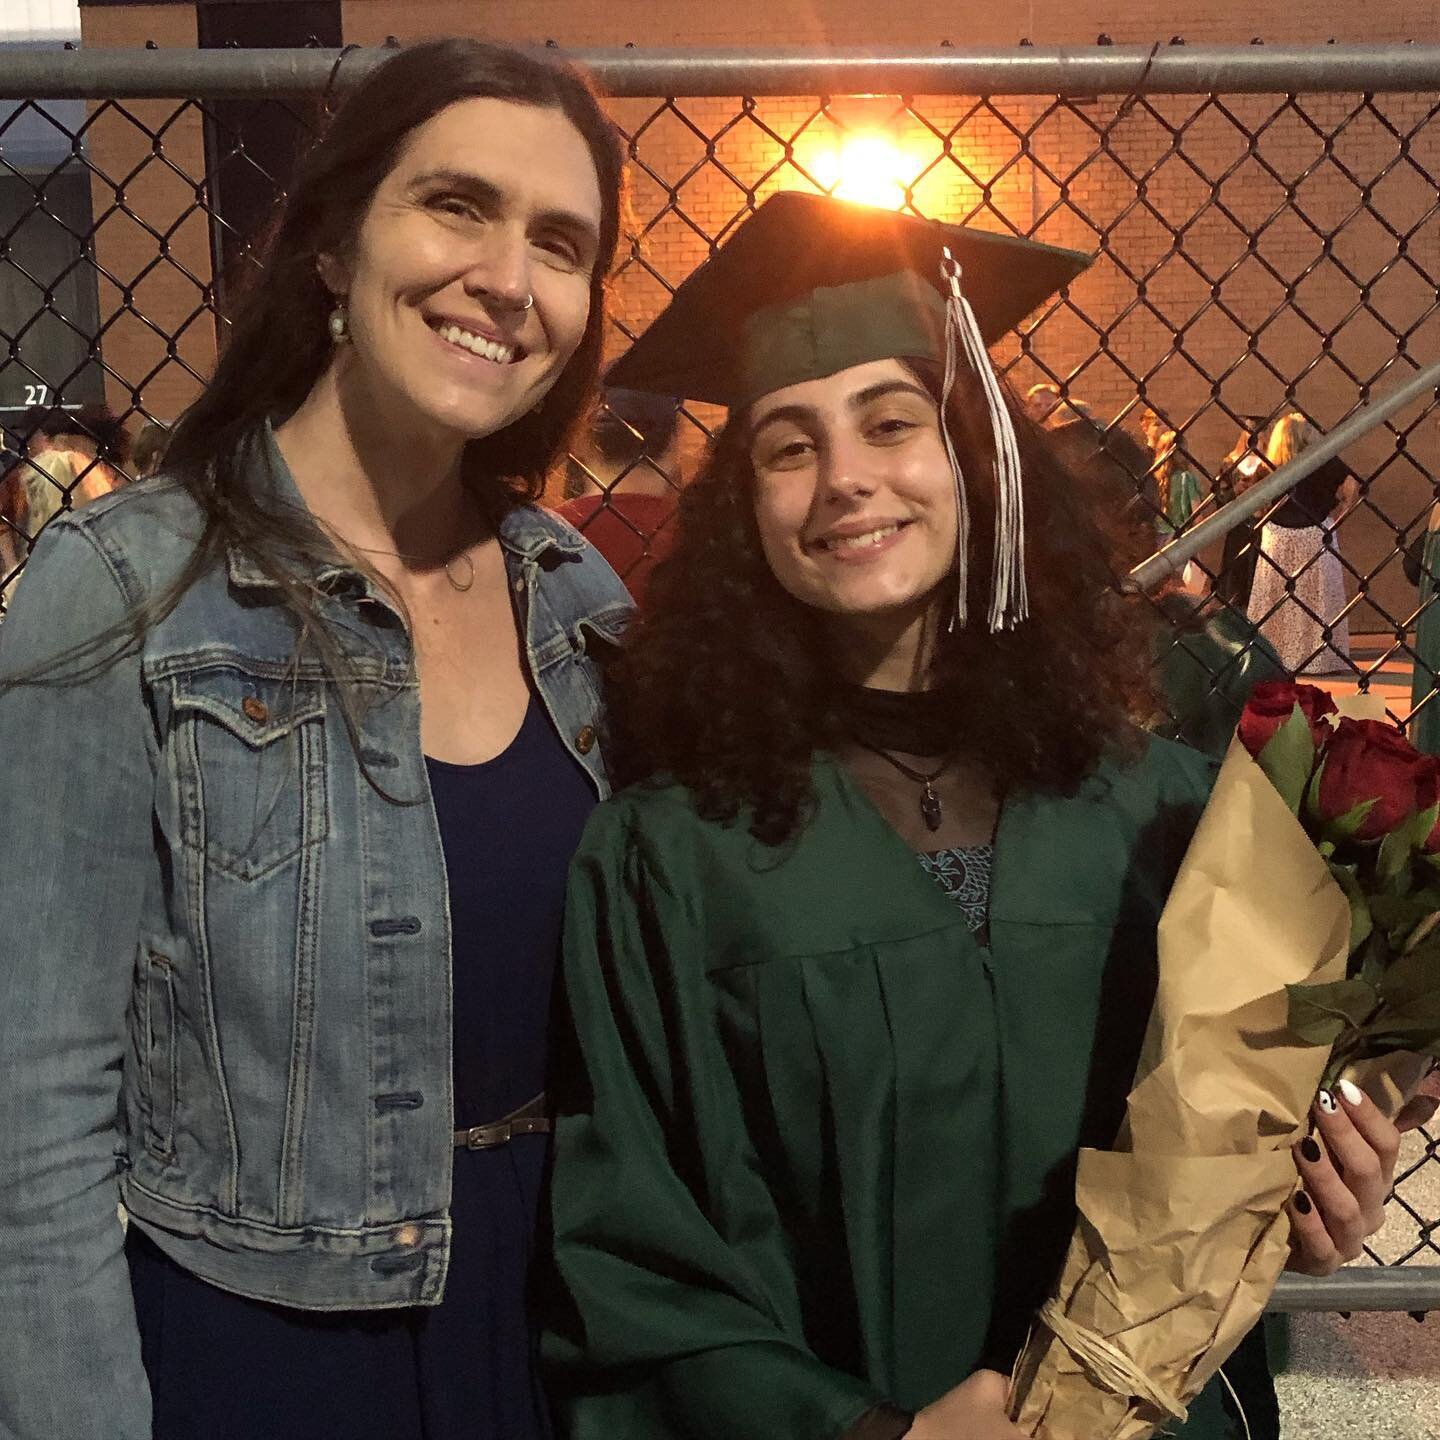 What a trip it is to be part of this young lady&rsquo;s life as she completes high school and turns 18. To be taken back to what it felt like to be that age, in that transition. I look at her, with an experience so different from mine and as a person